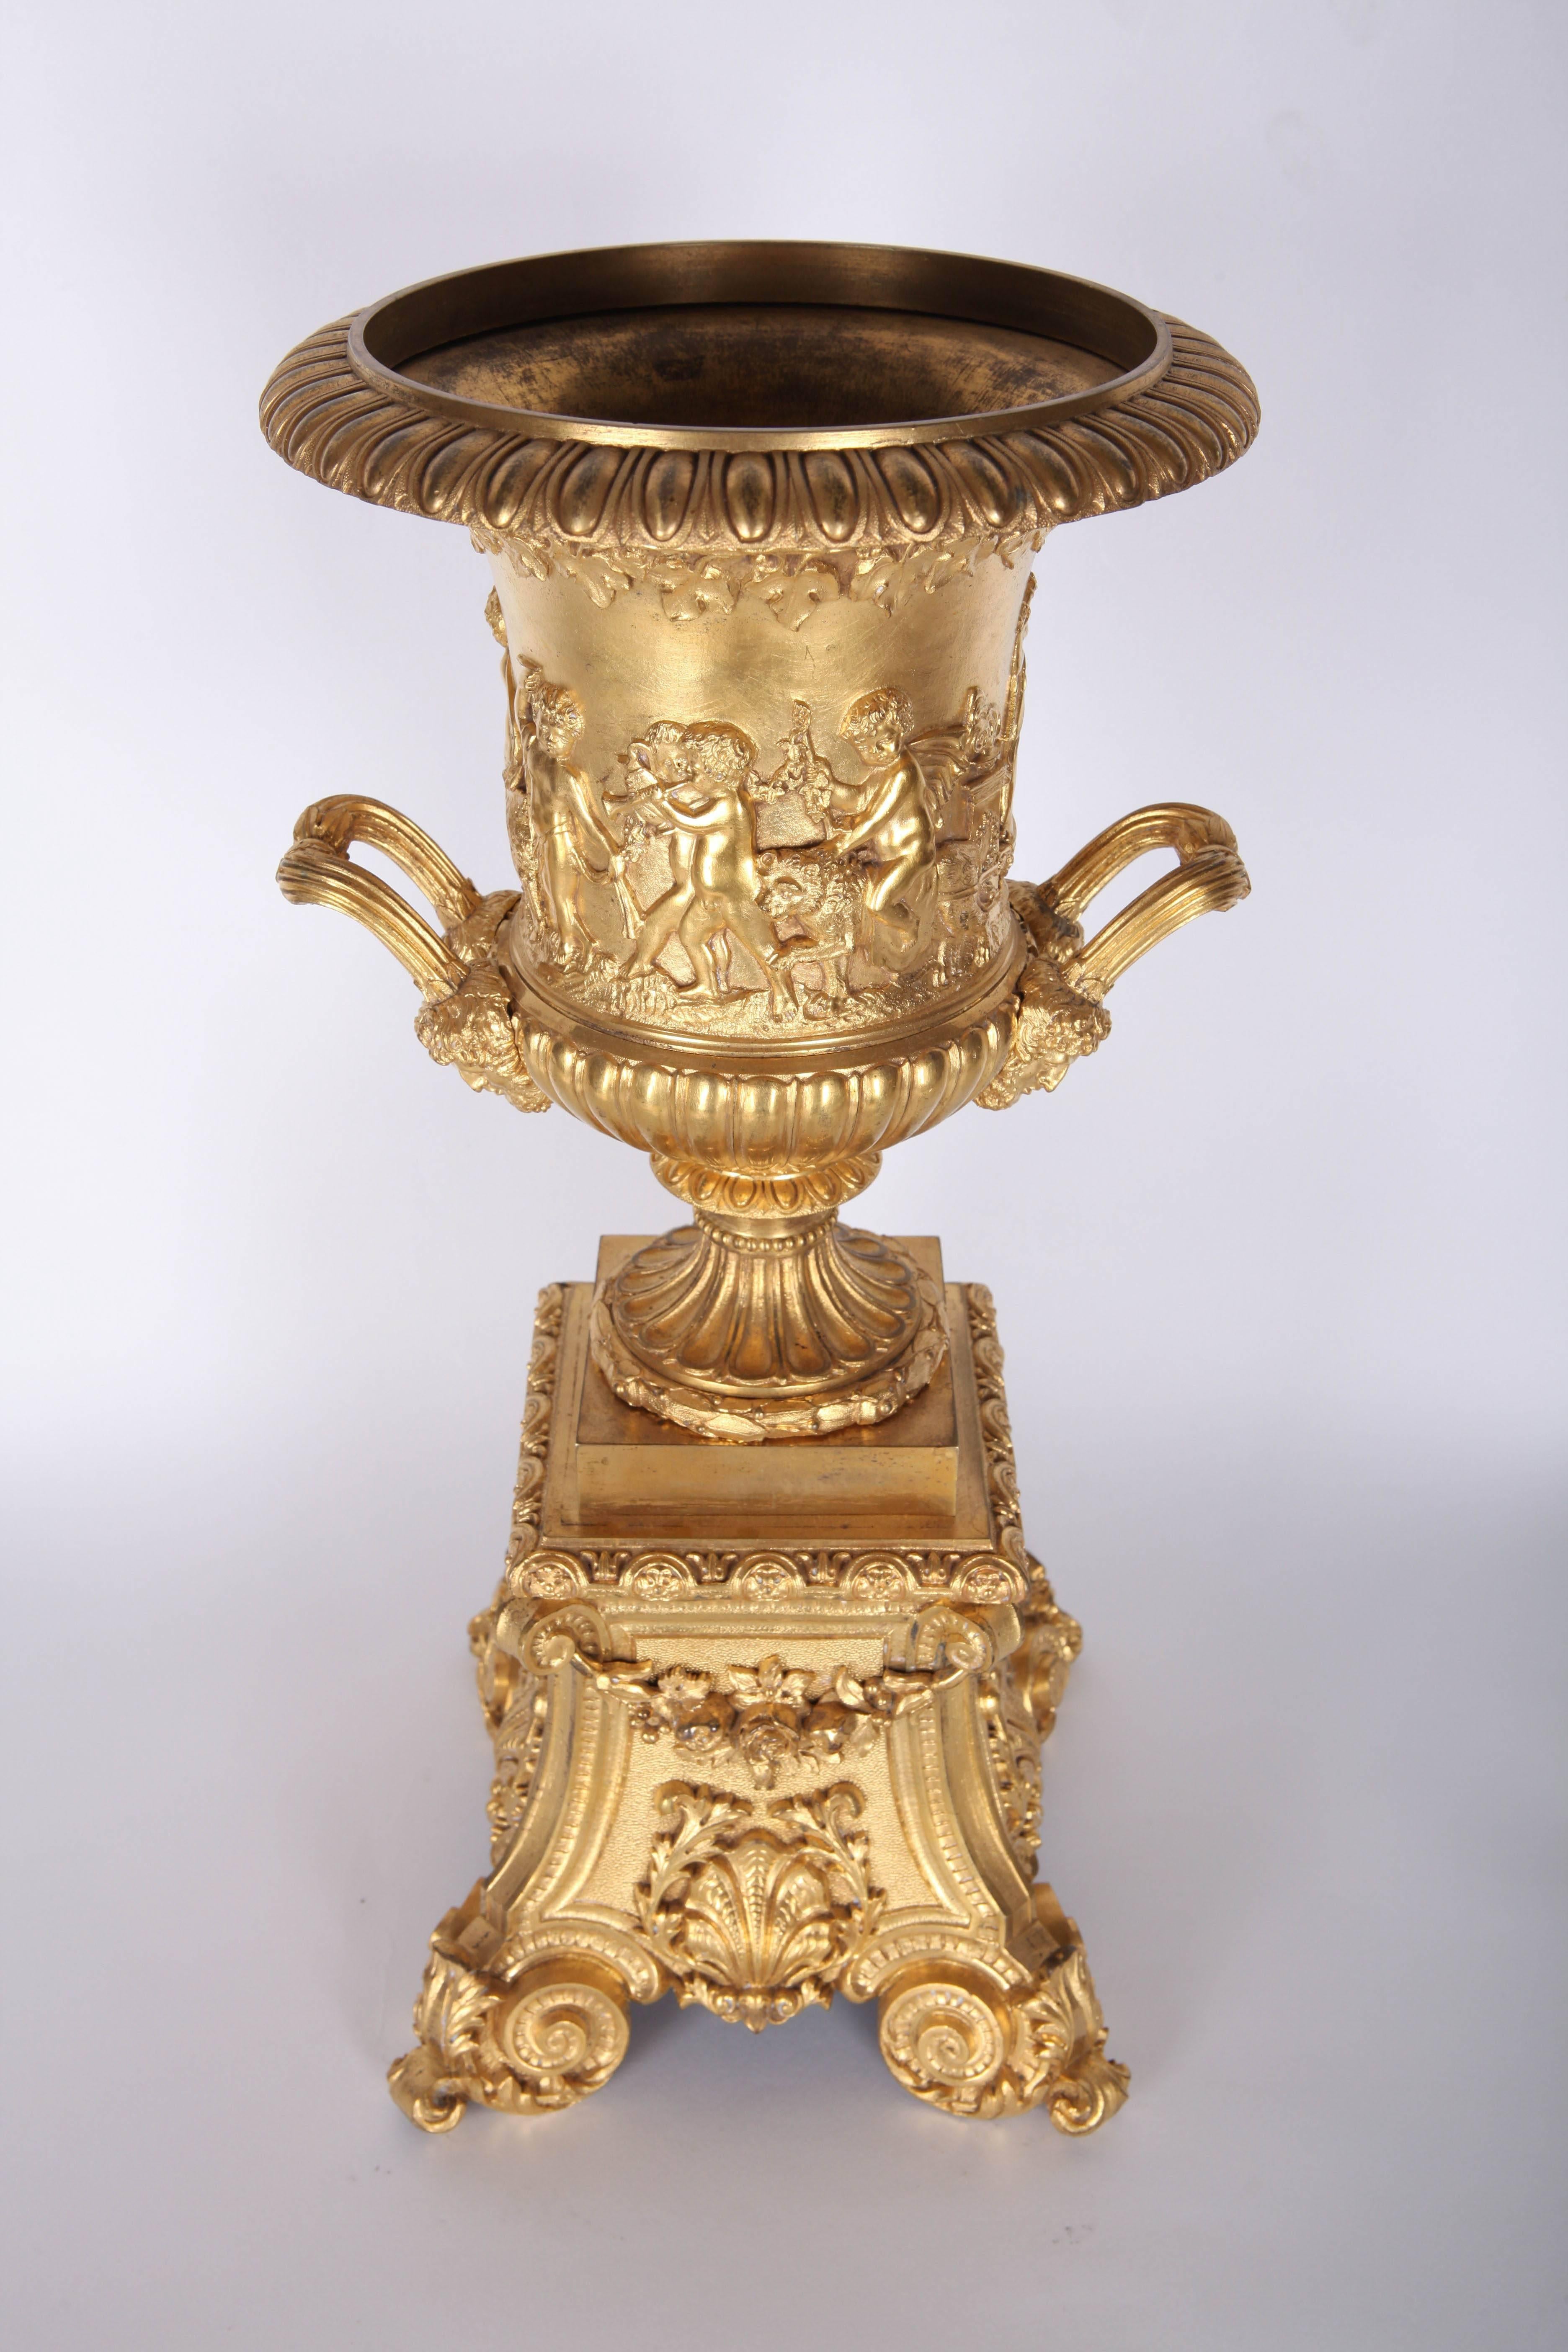 Louis XV 19th French Century Gilt Bronze Centerpiece Vase After the Antique For Sale